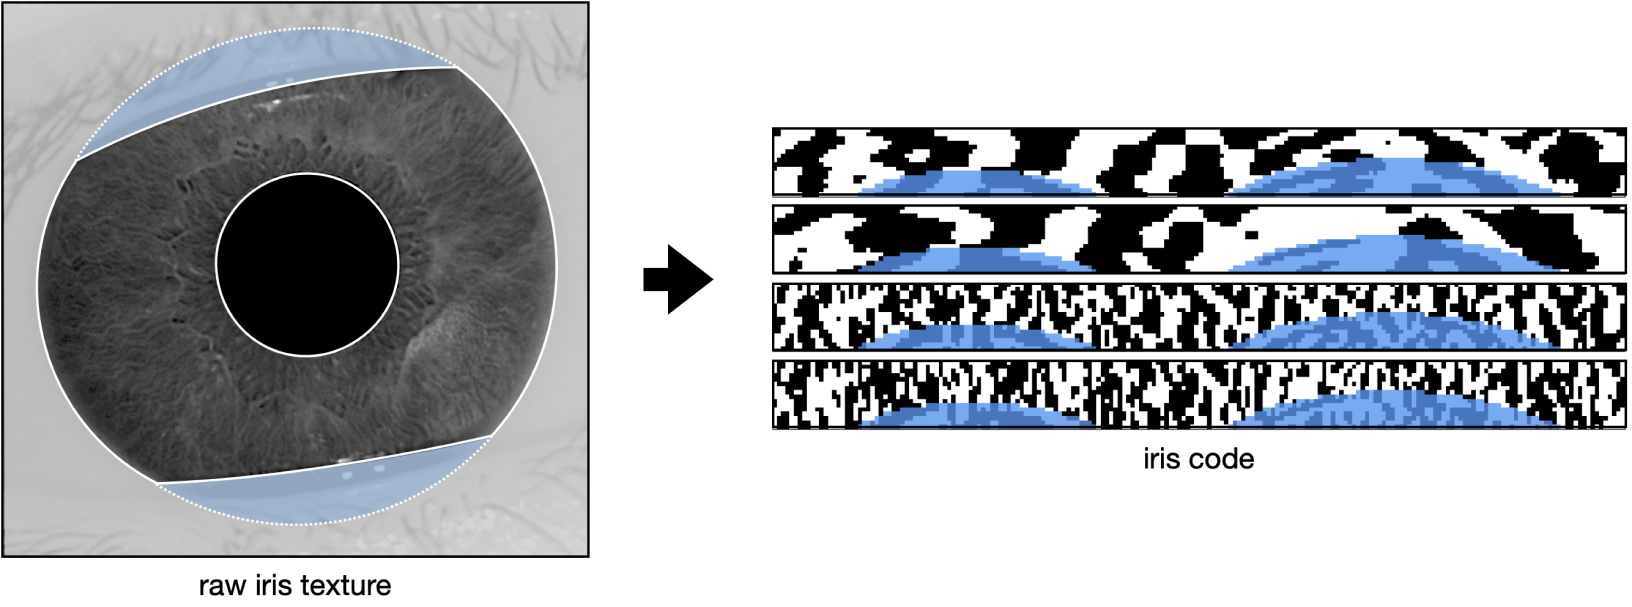 Figure 24: Example of an input and output of the biometric pipeline. Fig. 1.a is an example of an infrared iris texture image taken by the Orb. Fig. 1.b is an example of an iris code produced from the iris texture image in Fig. 1.a, effectively aggregating the iris texture.